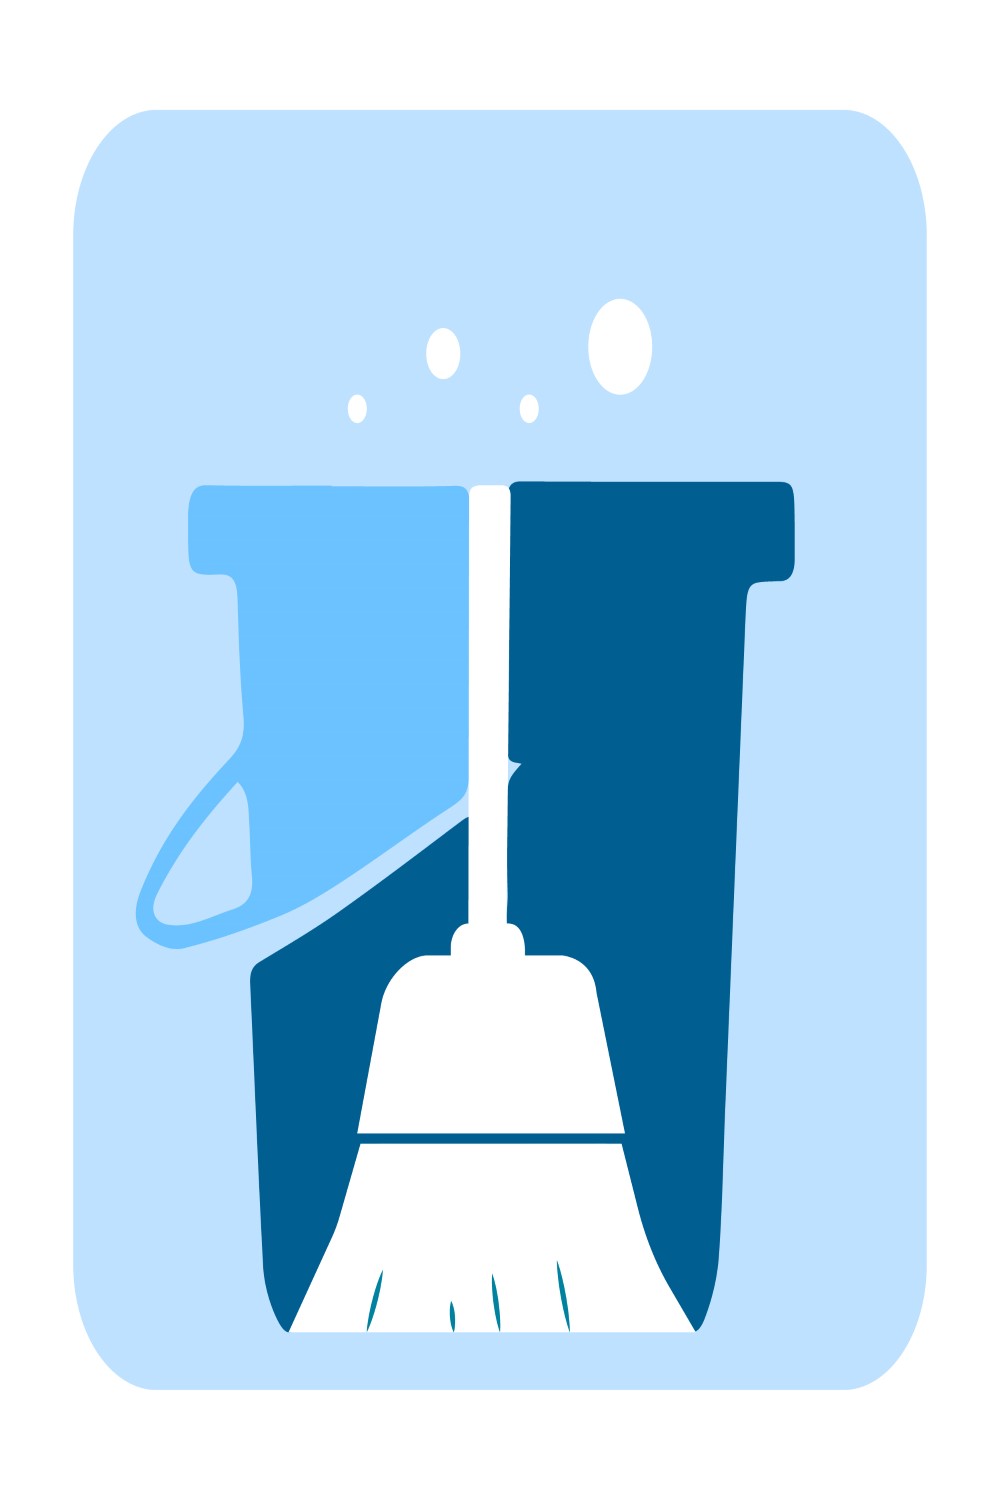 Cleaning Icon Design pinterest image.